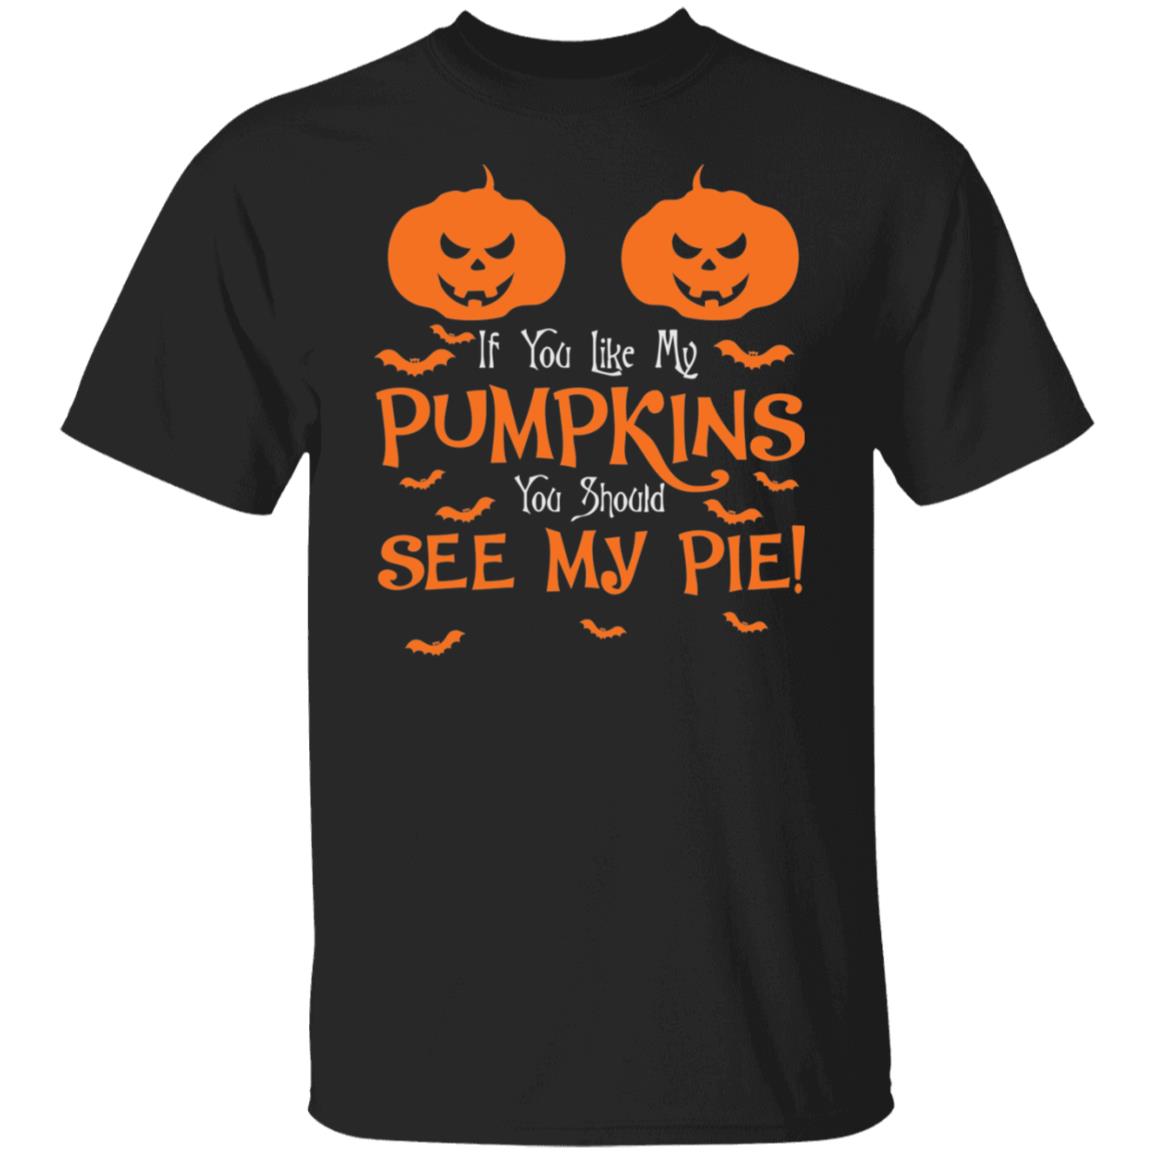 If You Like My Pumpkins You Should See My Pie Funny Halloween Shirt